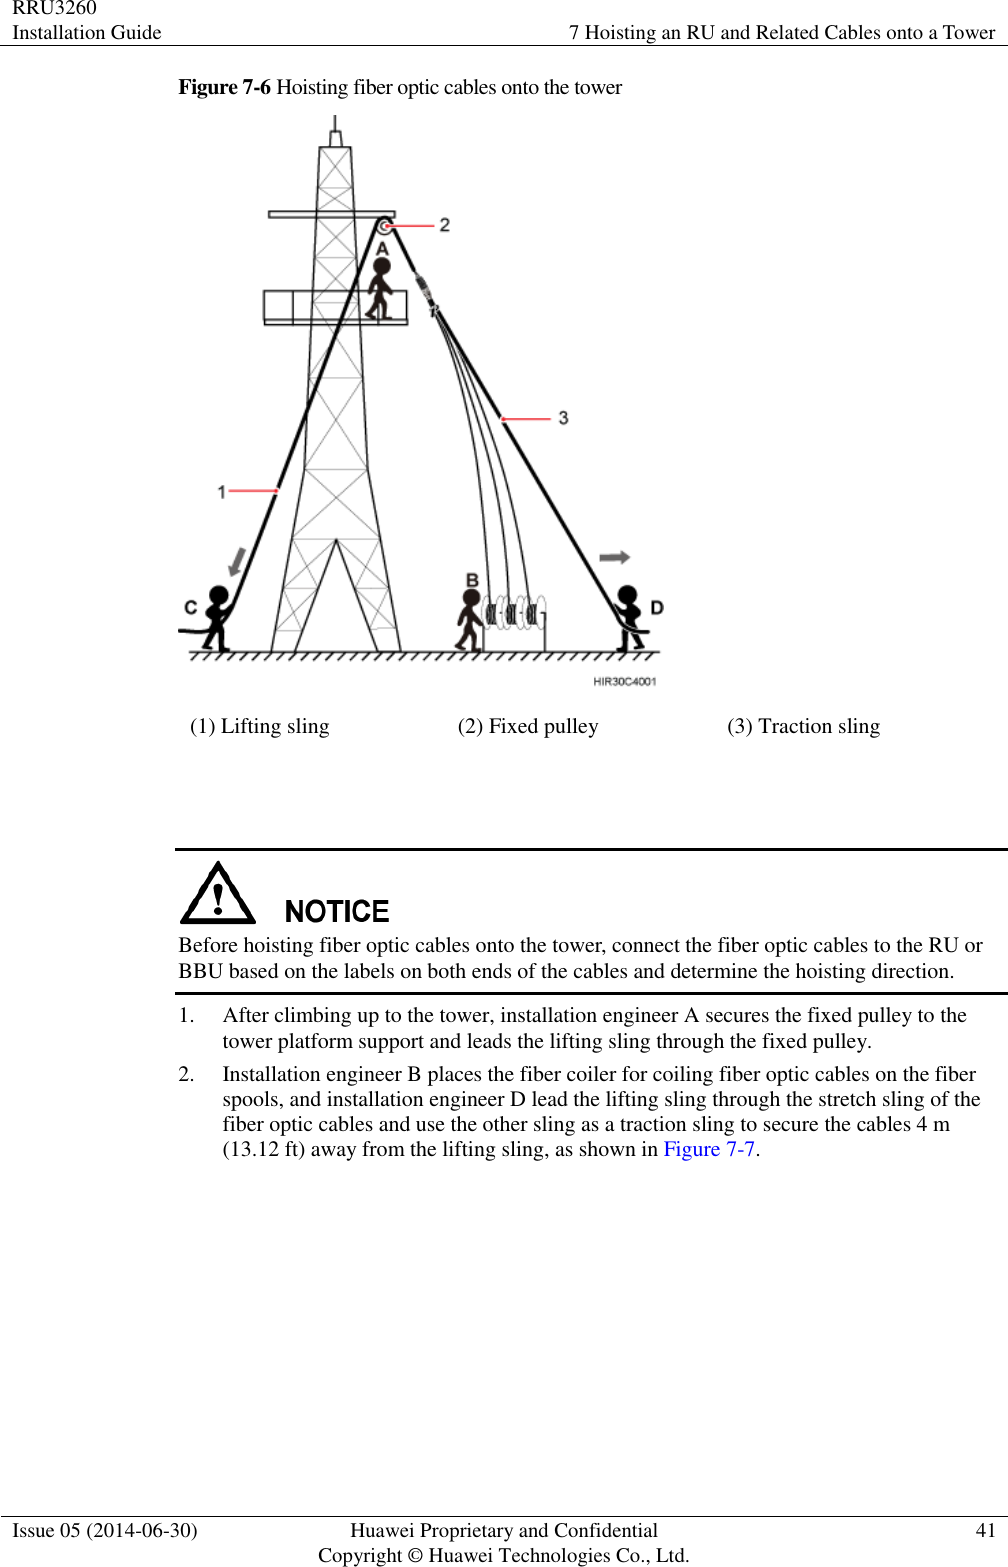 RRU3260 Installation Guide 7 Hoisting an RU and Related Cables onto a Tower  Issue 05 (2014-06-30) Huawei Proprietary and Confidential                                     Copyright © Huawei Technologies Co., Ltd. 41  Figure 7-6 Hoisting fiber optic cables onto the tower  (1) Lifting sling (2) Fixed pulley (3) Traction sling    Before hoisting fiber optic cables onto the tower, connect the fiber optic cables to the RU or BBU based on the labels on both ends of the cables and determine the hoisting direction. 1. After climbing up to the tower, installation engineer A secures the fixed pulley to the tower platform support and leads the lifting sling through the fixed pulley. 2. Installation engineer B places the fiber coiler for coiling fiber optic cables on the fiber spools, and installation engineer D lead the lifting sling through the stretch sling of the fiber optic cables and use the other sling as a traction sling to secure the cables 4 m (13.12 ft) away from the lifting sling, as shown in Figure 7-7. 